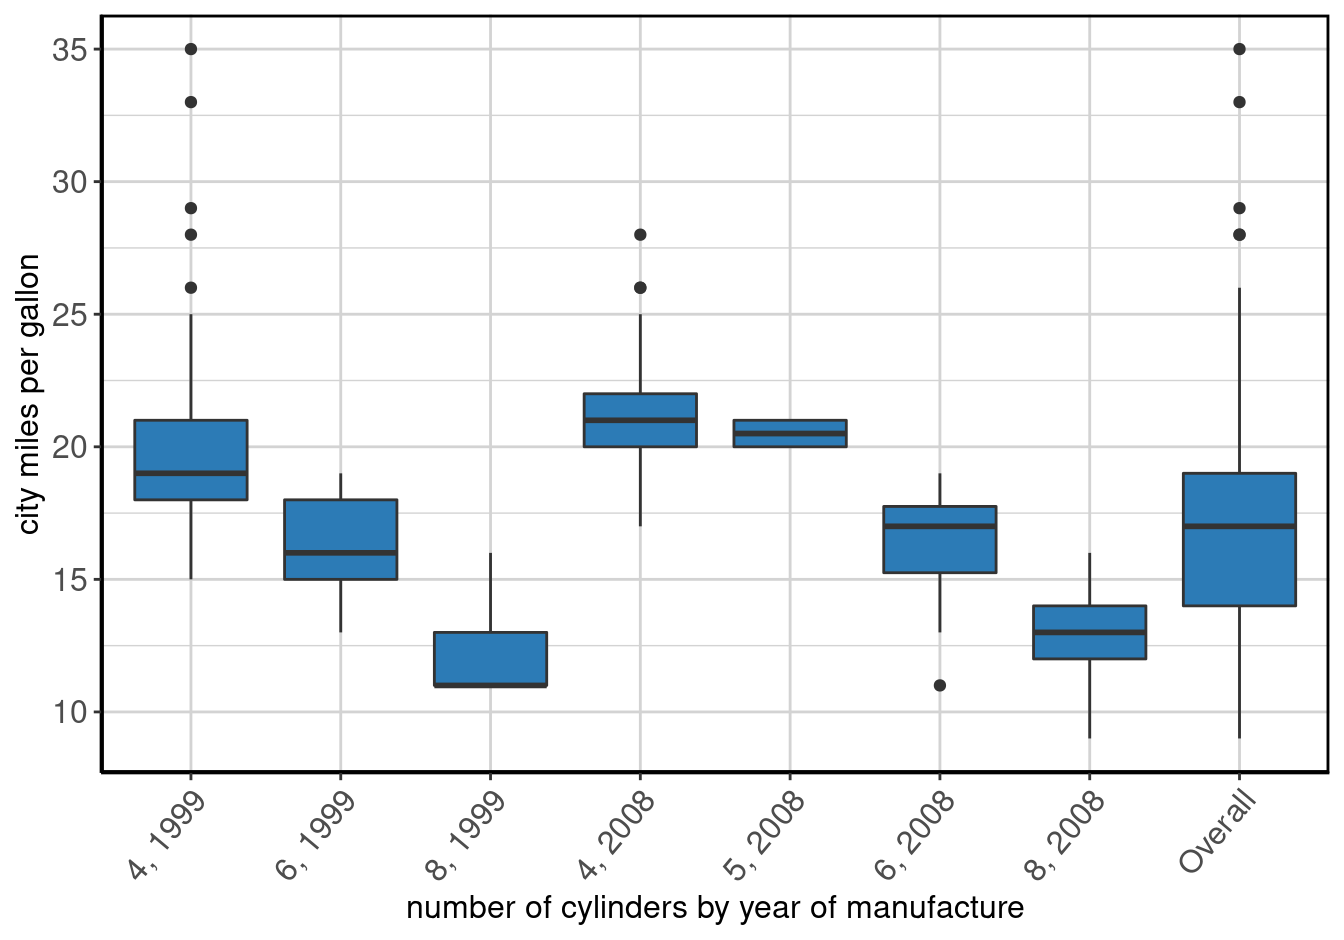 Stacked barplot of city miles per gallon by number of cylinders by year of manufacture.